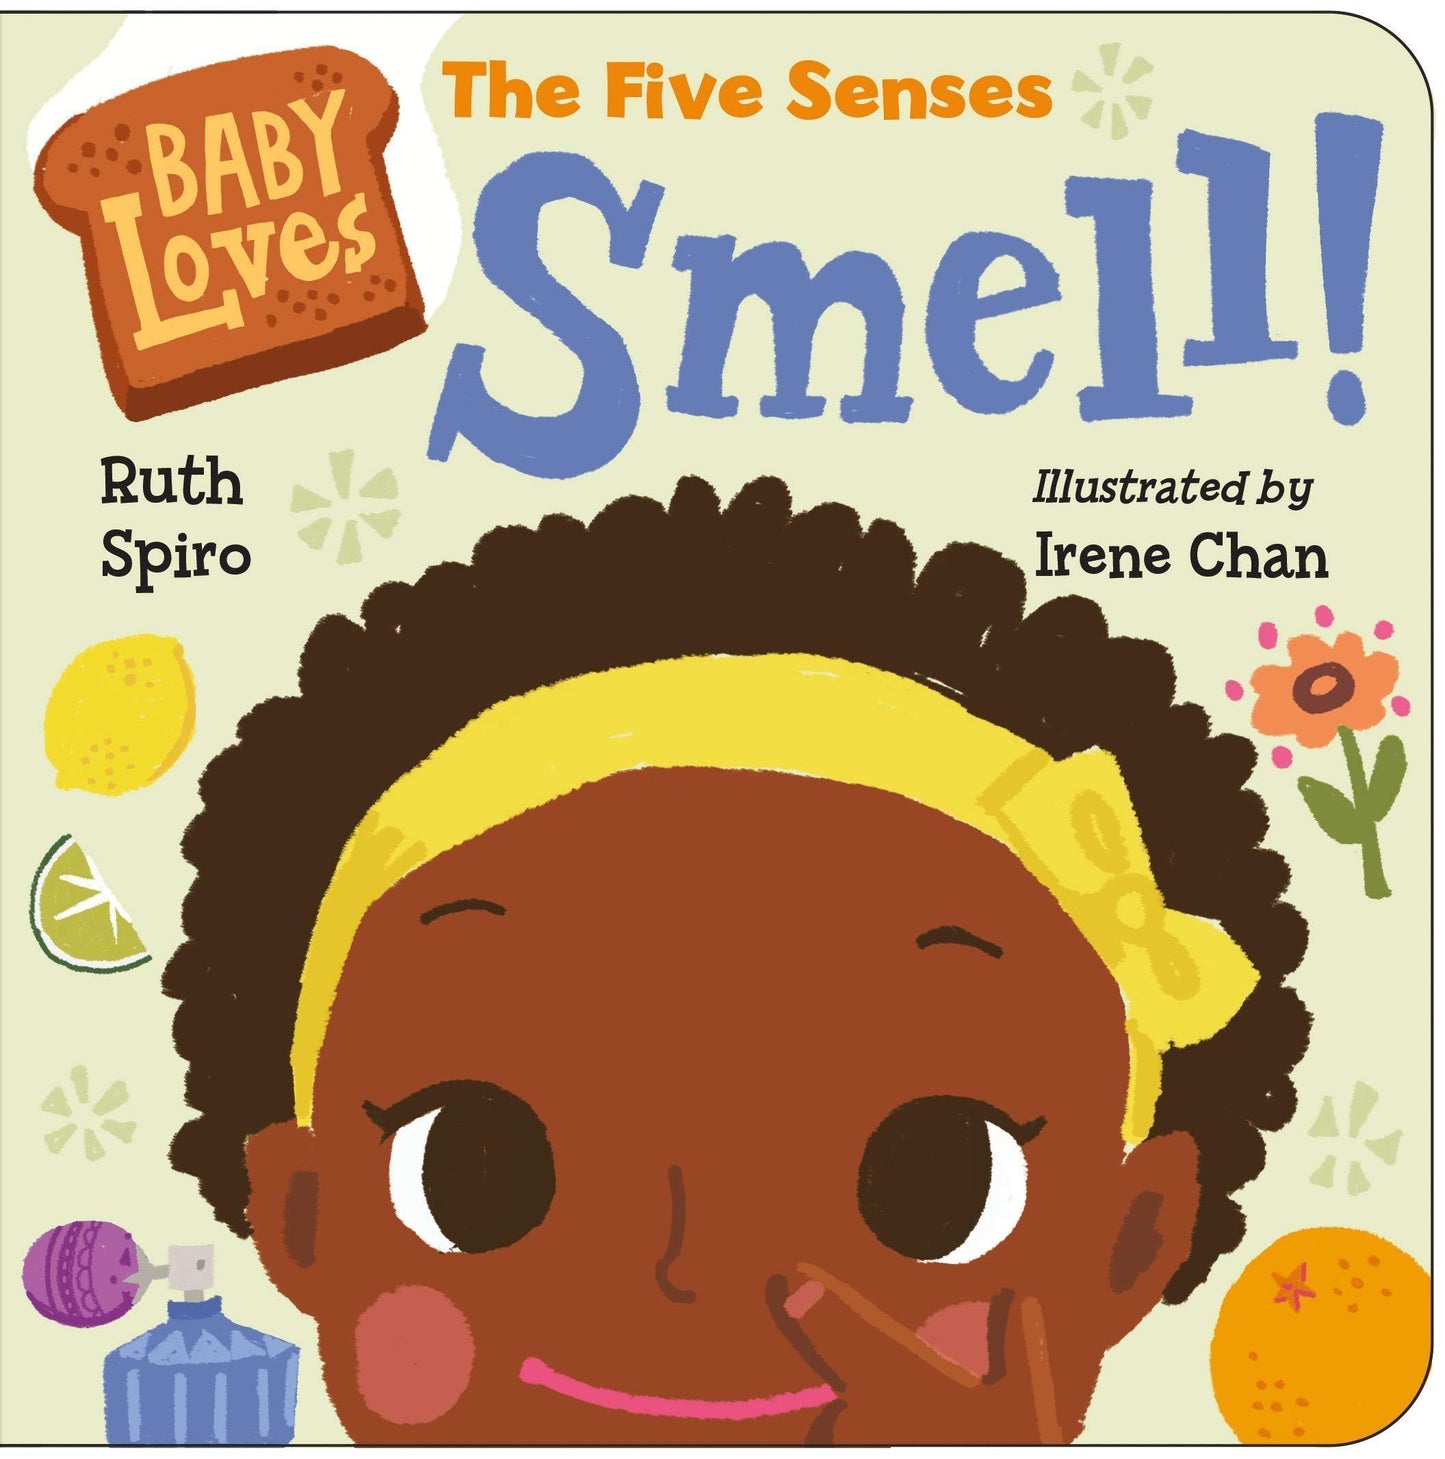 Baby Loves the Five Senses: Smell! - ECOBUNS BABY + CO.